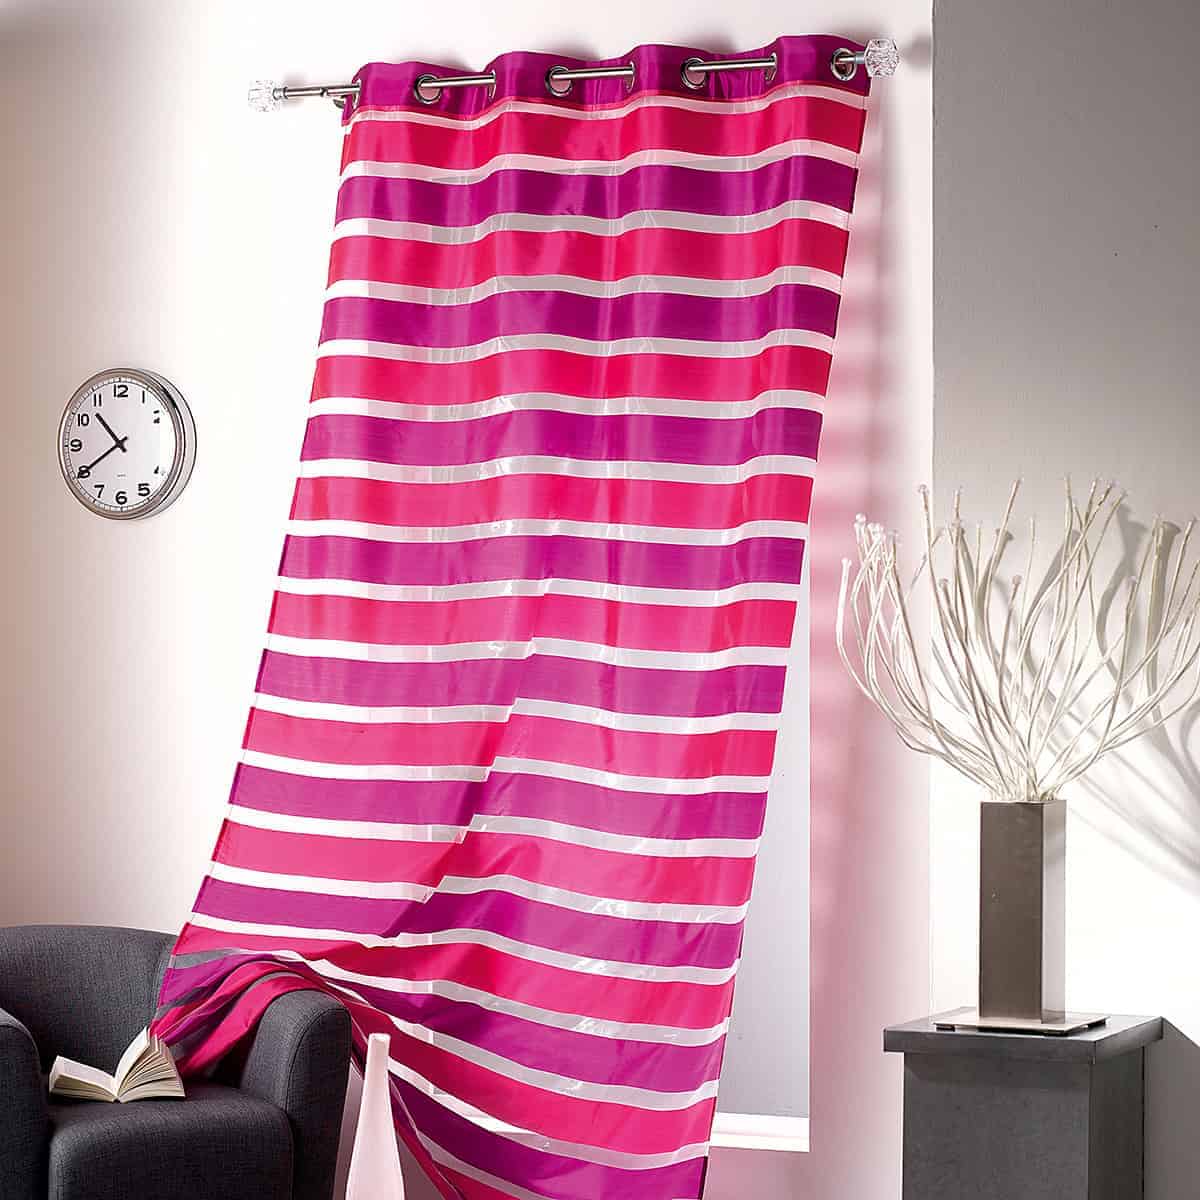 Striped Sheer Grommet Curtain Panels Colorado 55 W x 95 L PINK